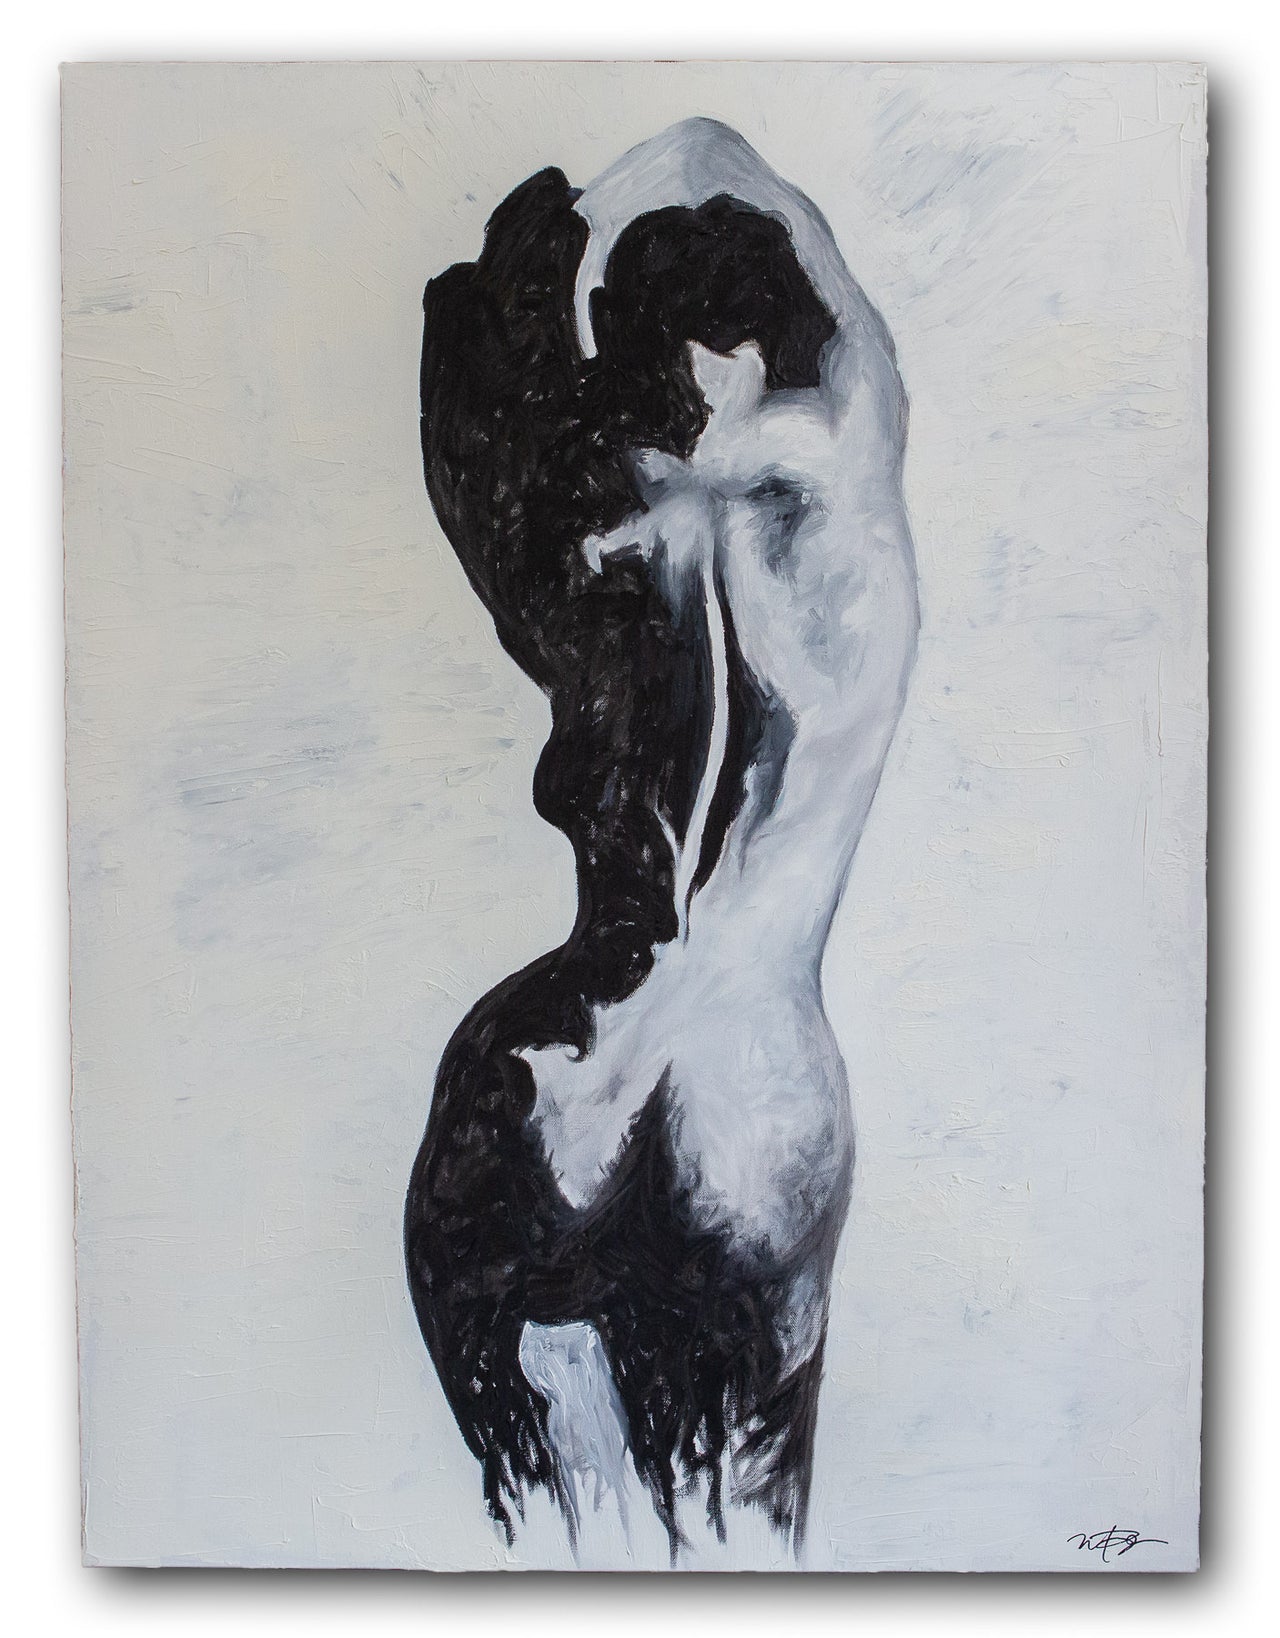 Black and white figure painting by local Calgary artist Mary-Jo Lough.  The models back is to the viewer with both of her hands above her head.